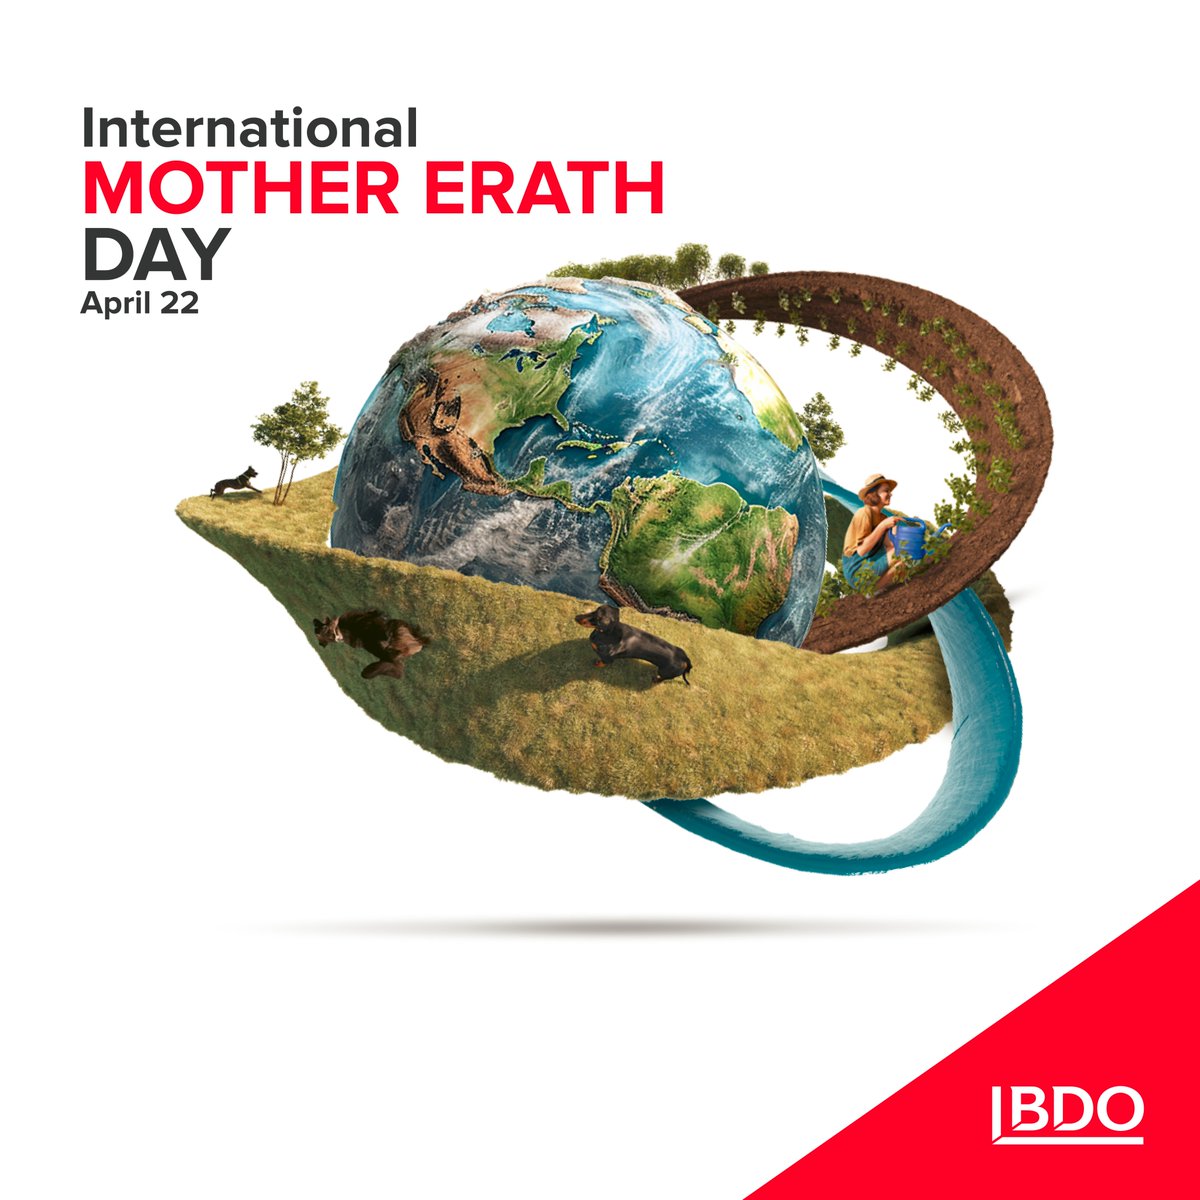 The United Nations General Assembly proclaimed 22 April as International Mother Earth Day through a resolution adopted in 2019. 

unep.org/events/un-day/…

#UNday #InternationalMotherEarthDay #BDO #BDOJordan